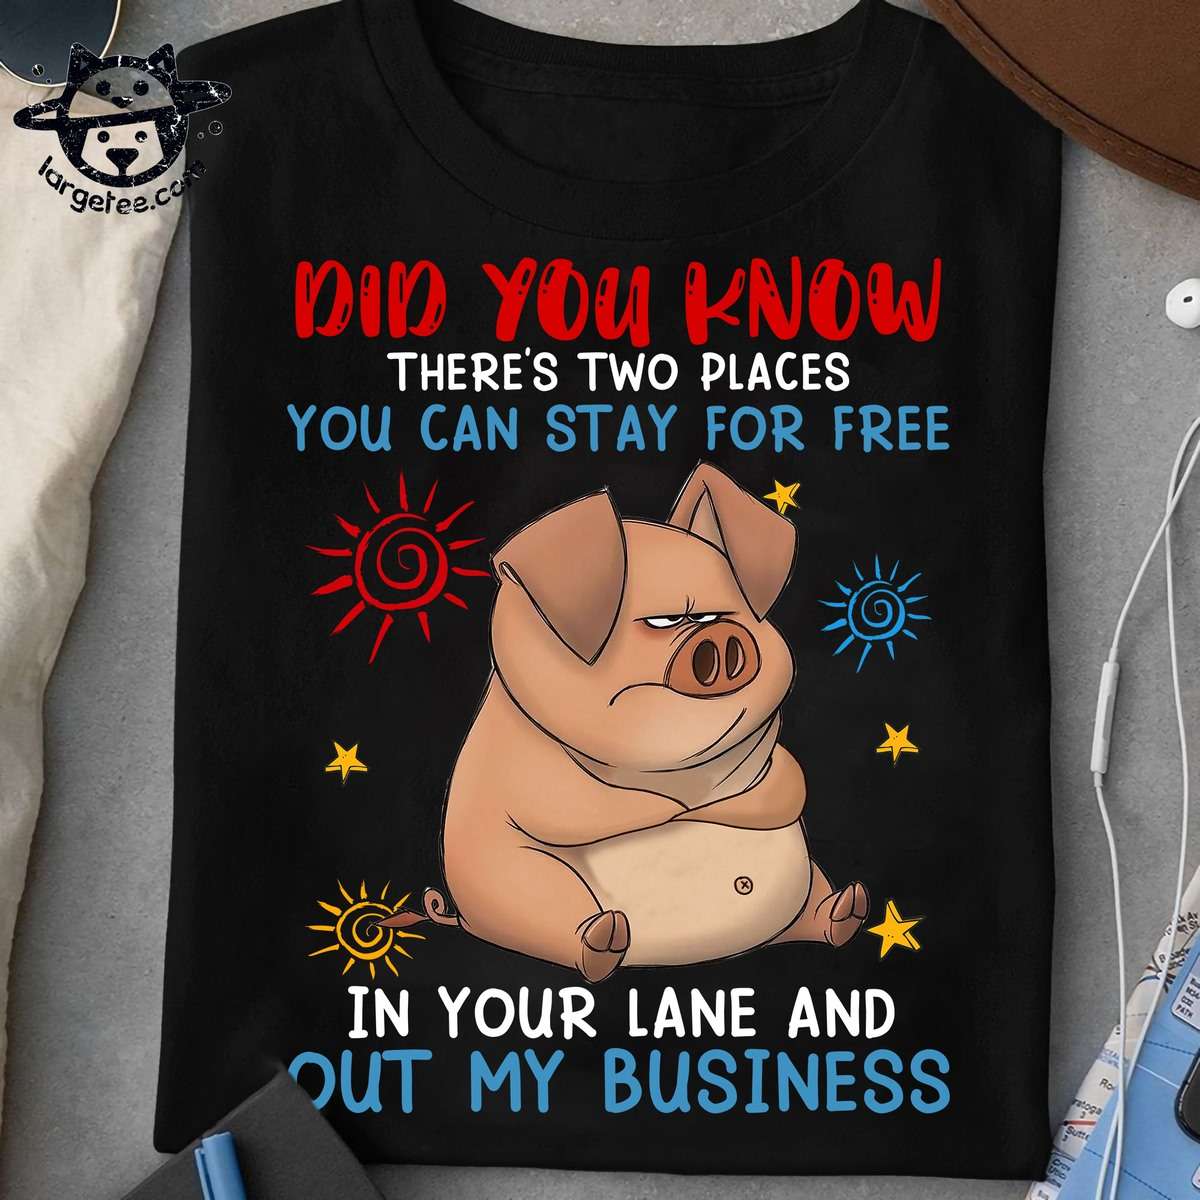 Did you know there's two places you can stay for free - In your lane and out my business, grumpy cute pig